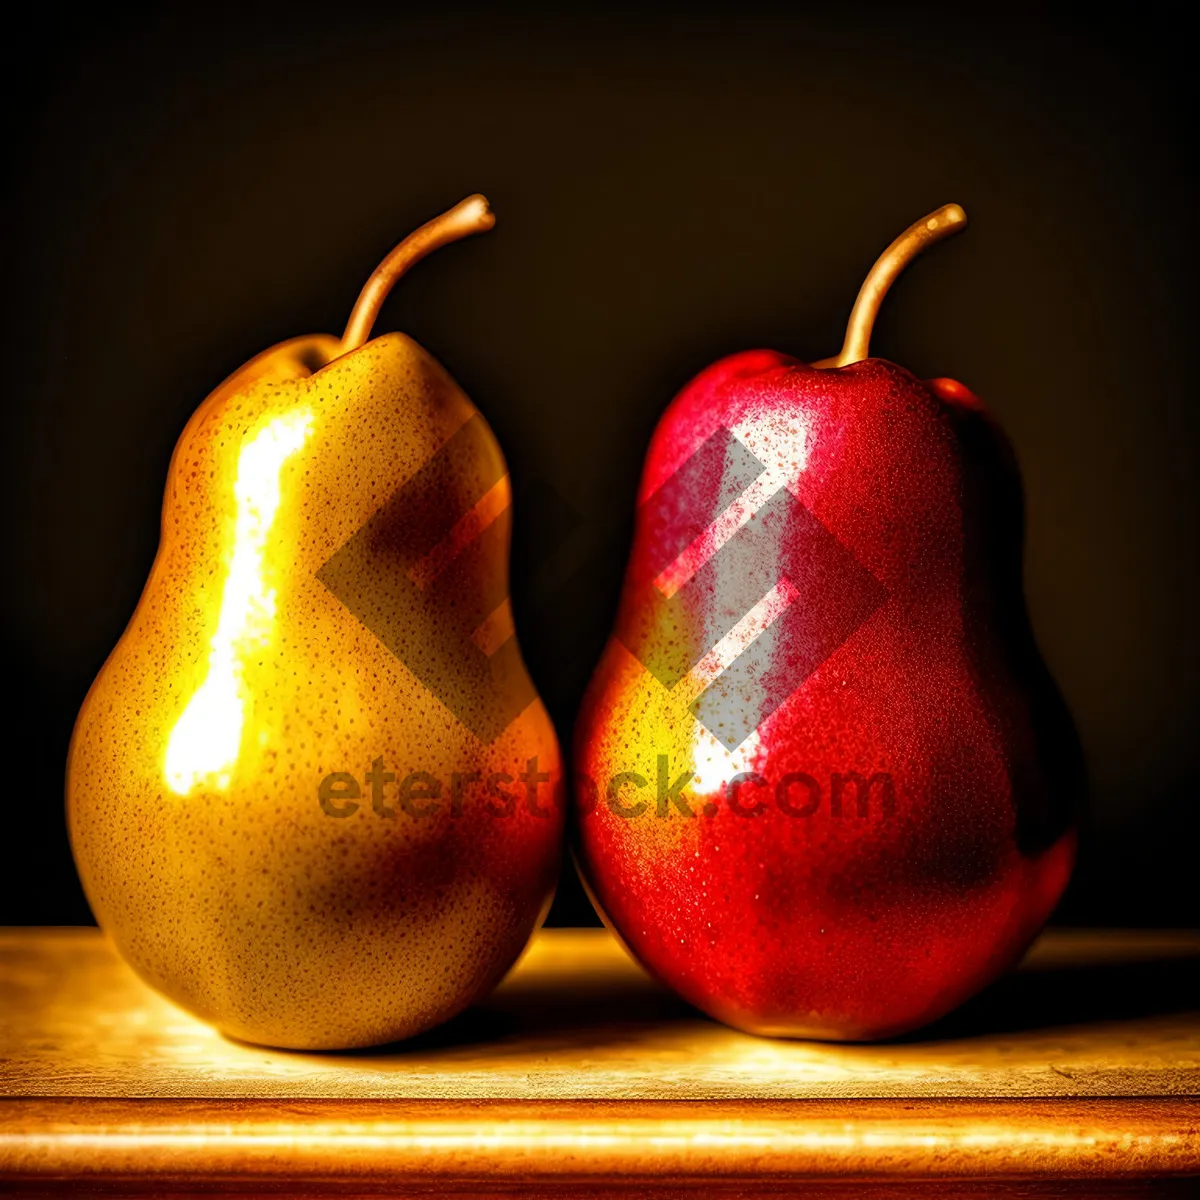 Picture of Ripe, Juicy Pear: a Sweet and Healthy Snack!